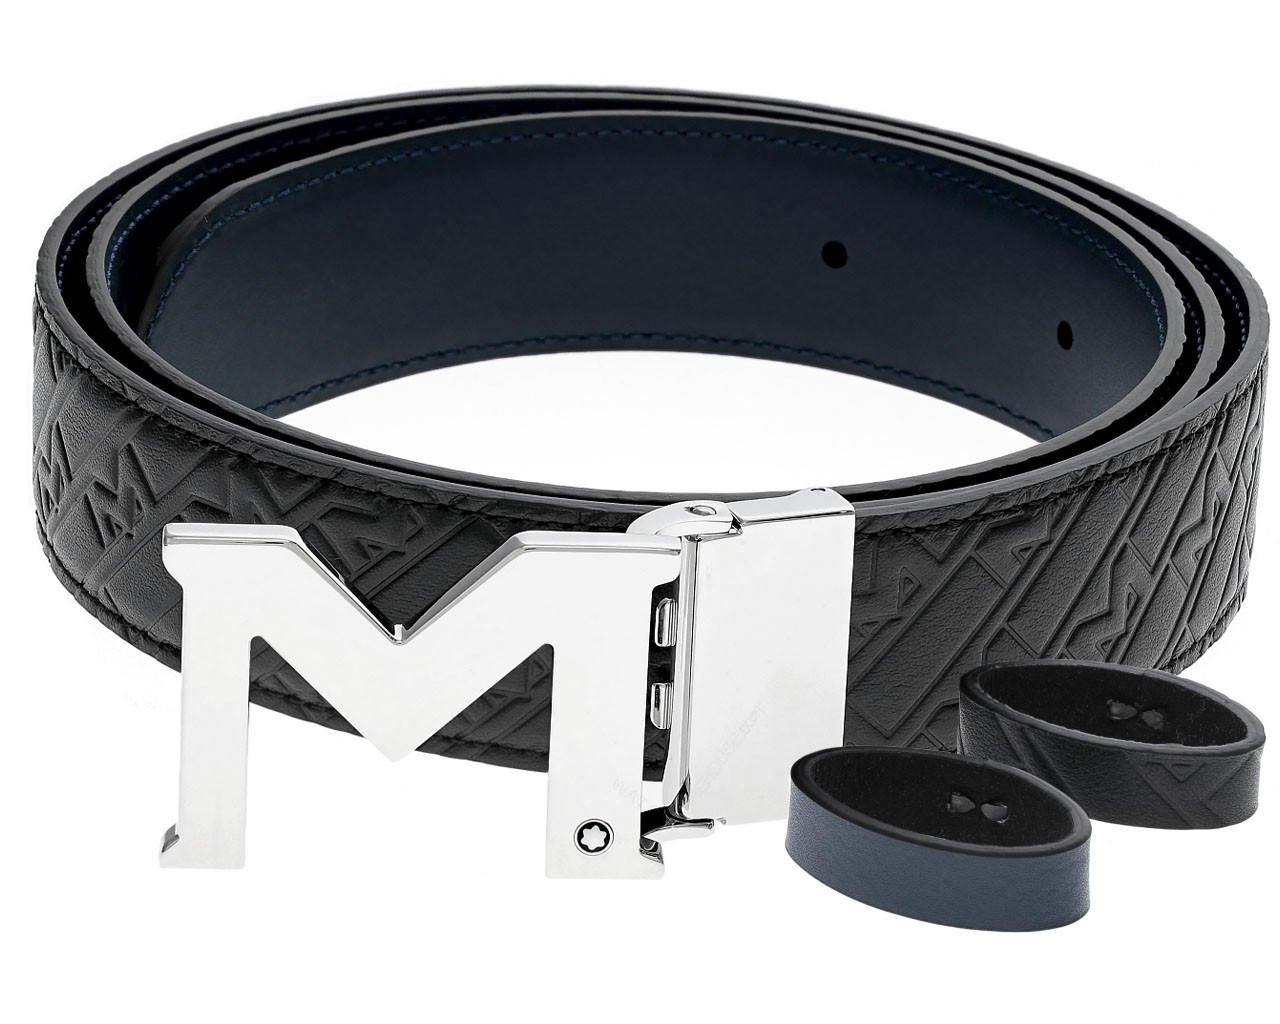 Men's MCM Belts + FREE SHIPPING, Accessories